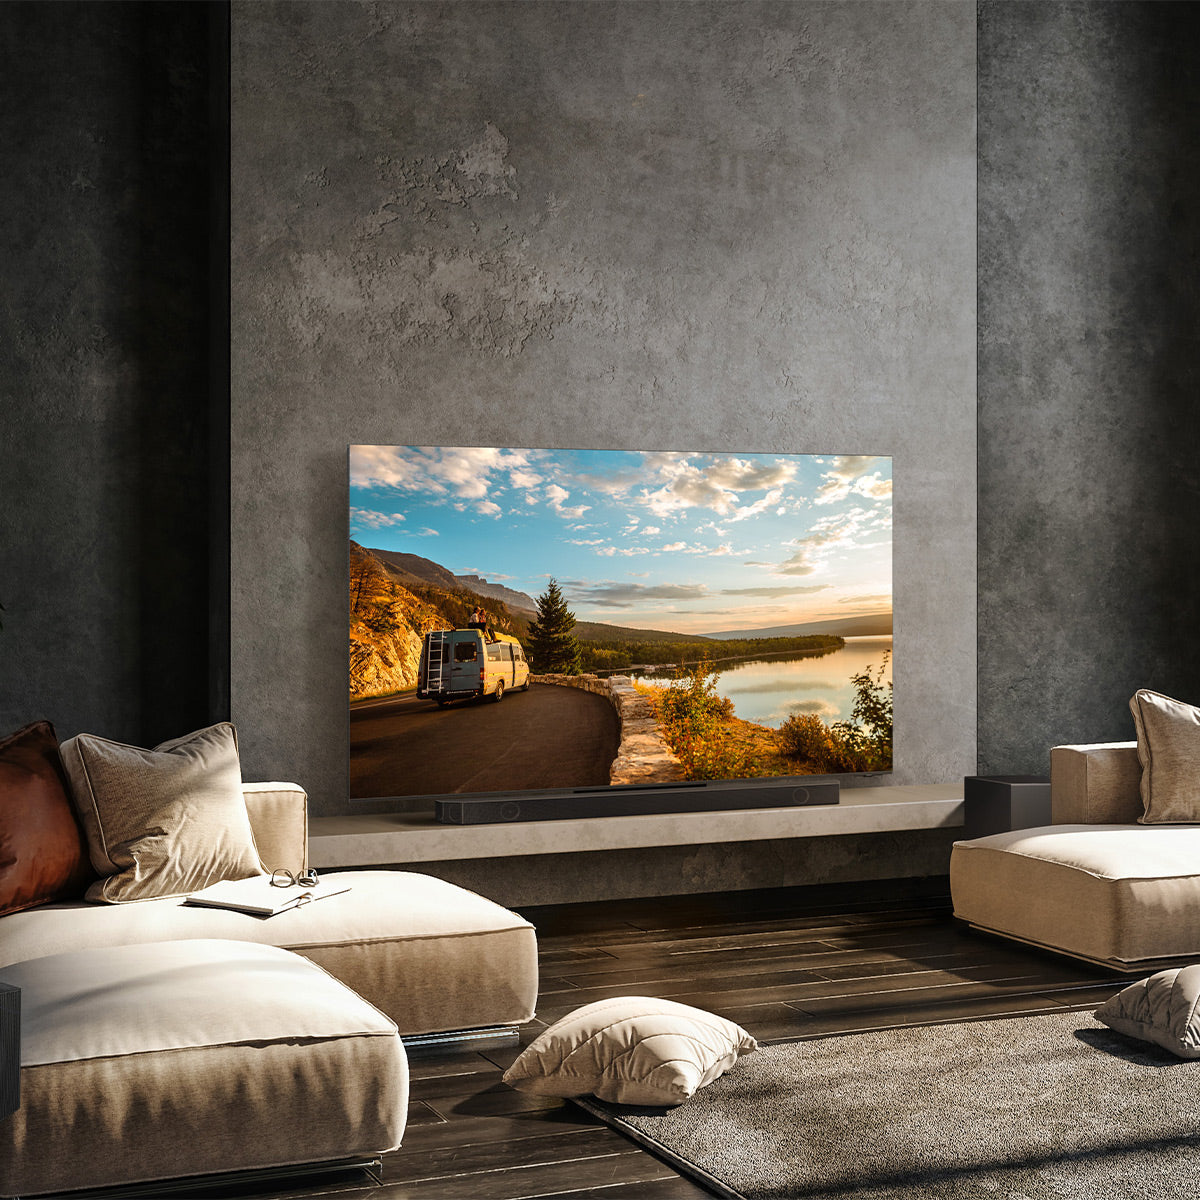 Samsung QN75QN900CA 75" 8K Neo QLED Smart TV with Neo Quantum HDR 8K Pro, Dolby Atmos, Object Tracking Sound+, & AI 4K Upscaling (2023)